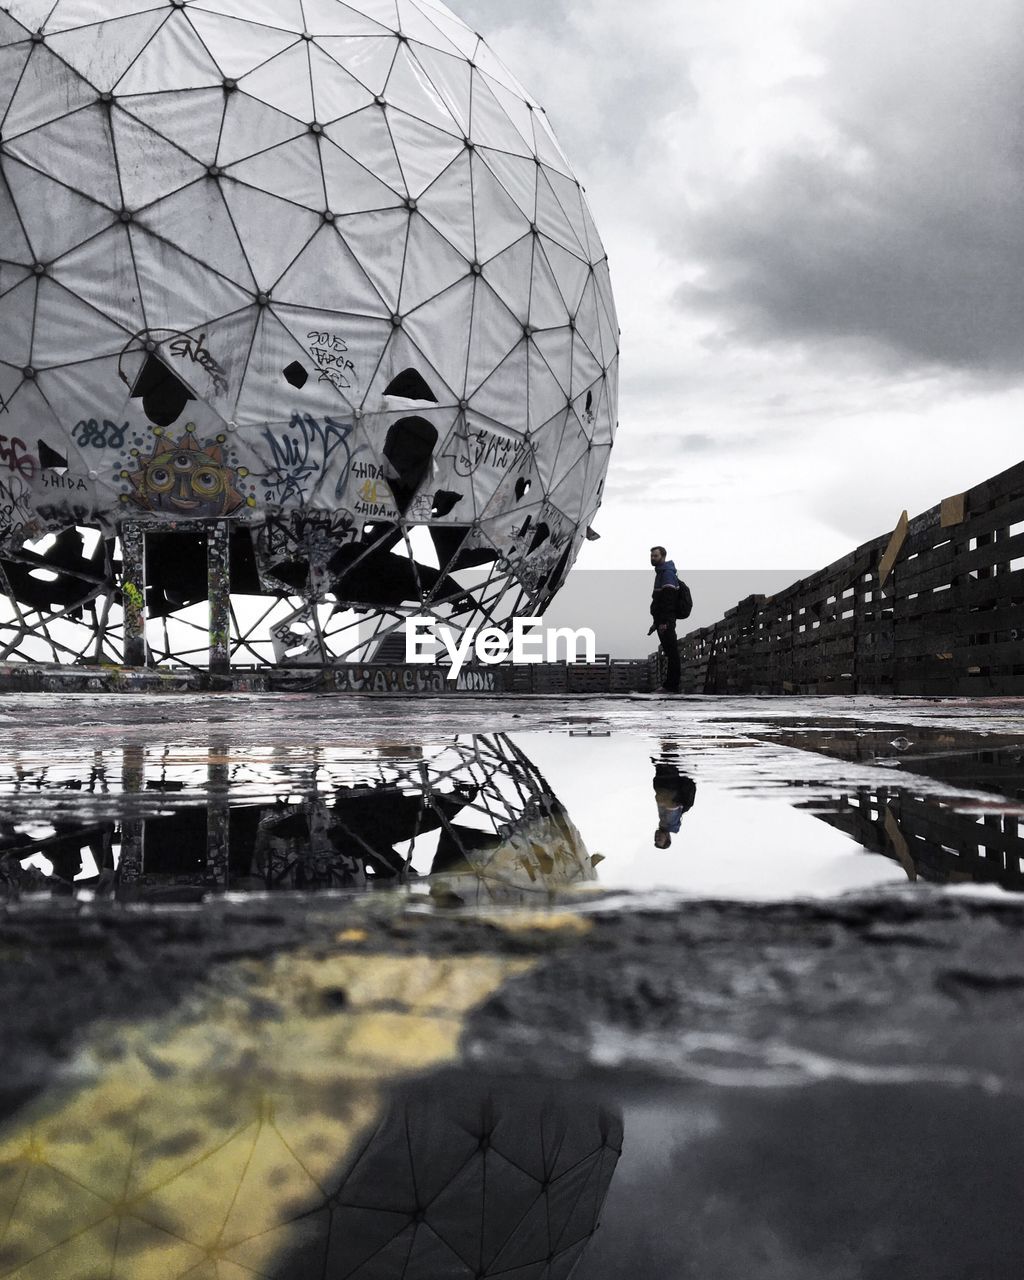 Man standing by abandoned dome on wet building terrace at teufelsberg during monsoon